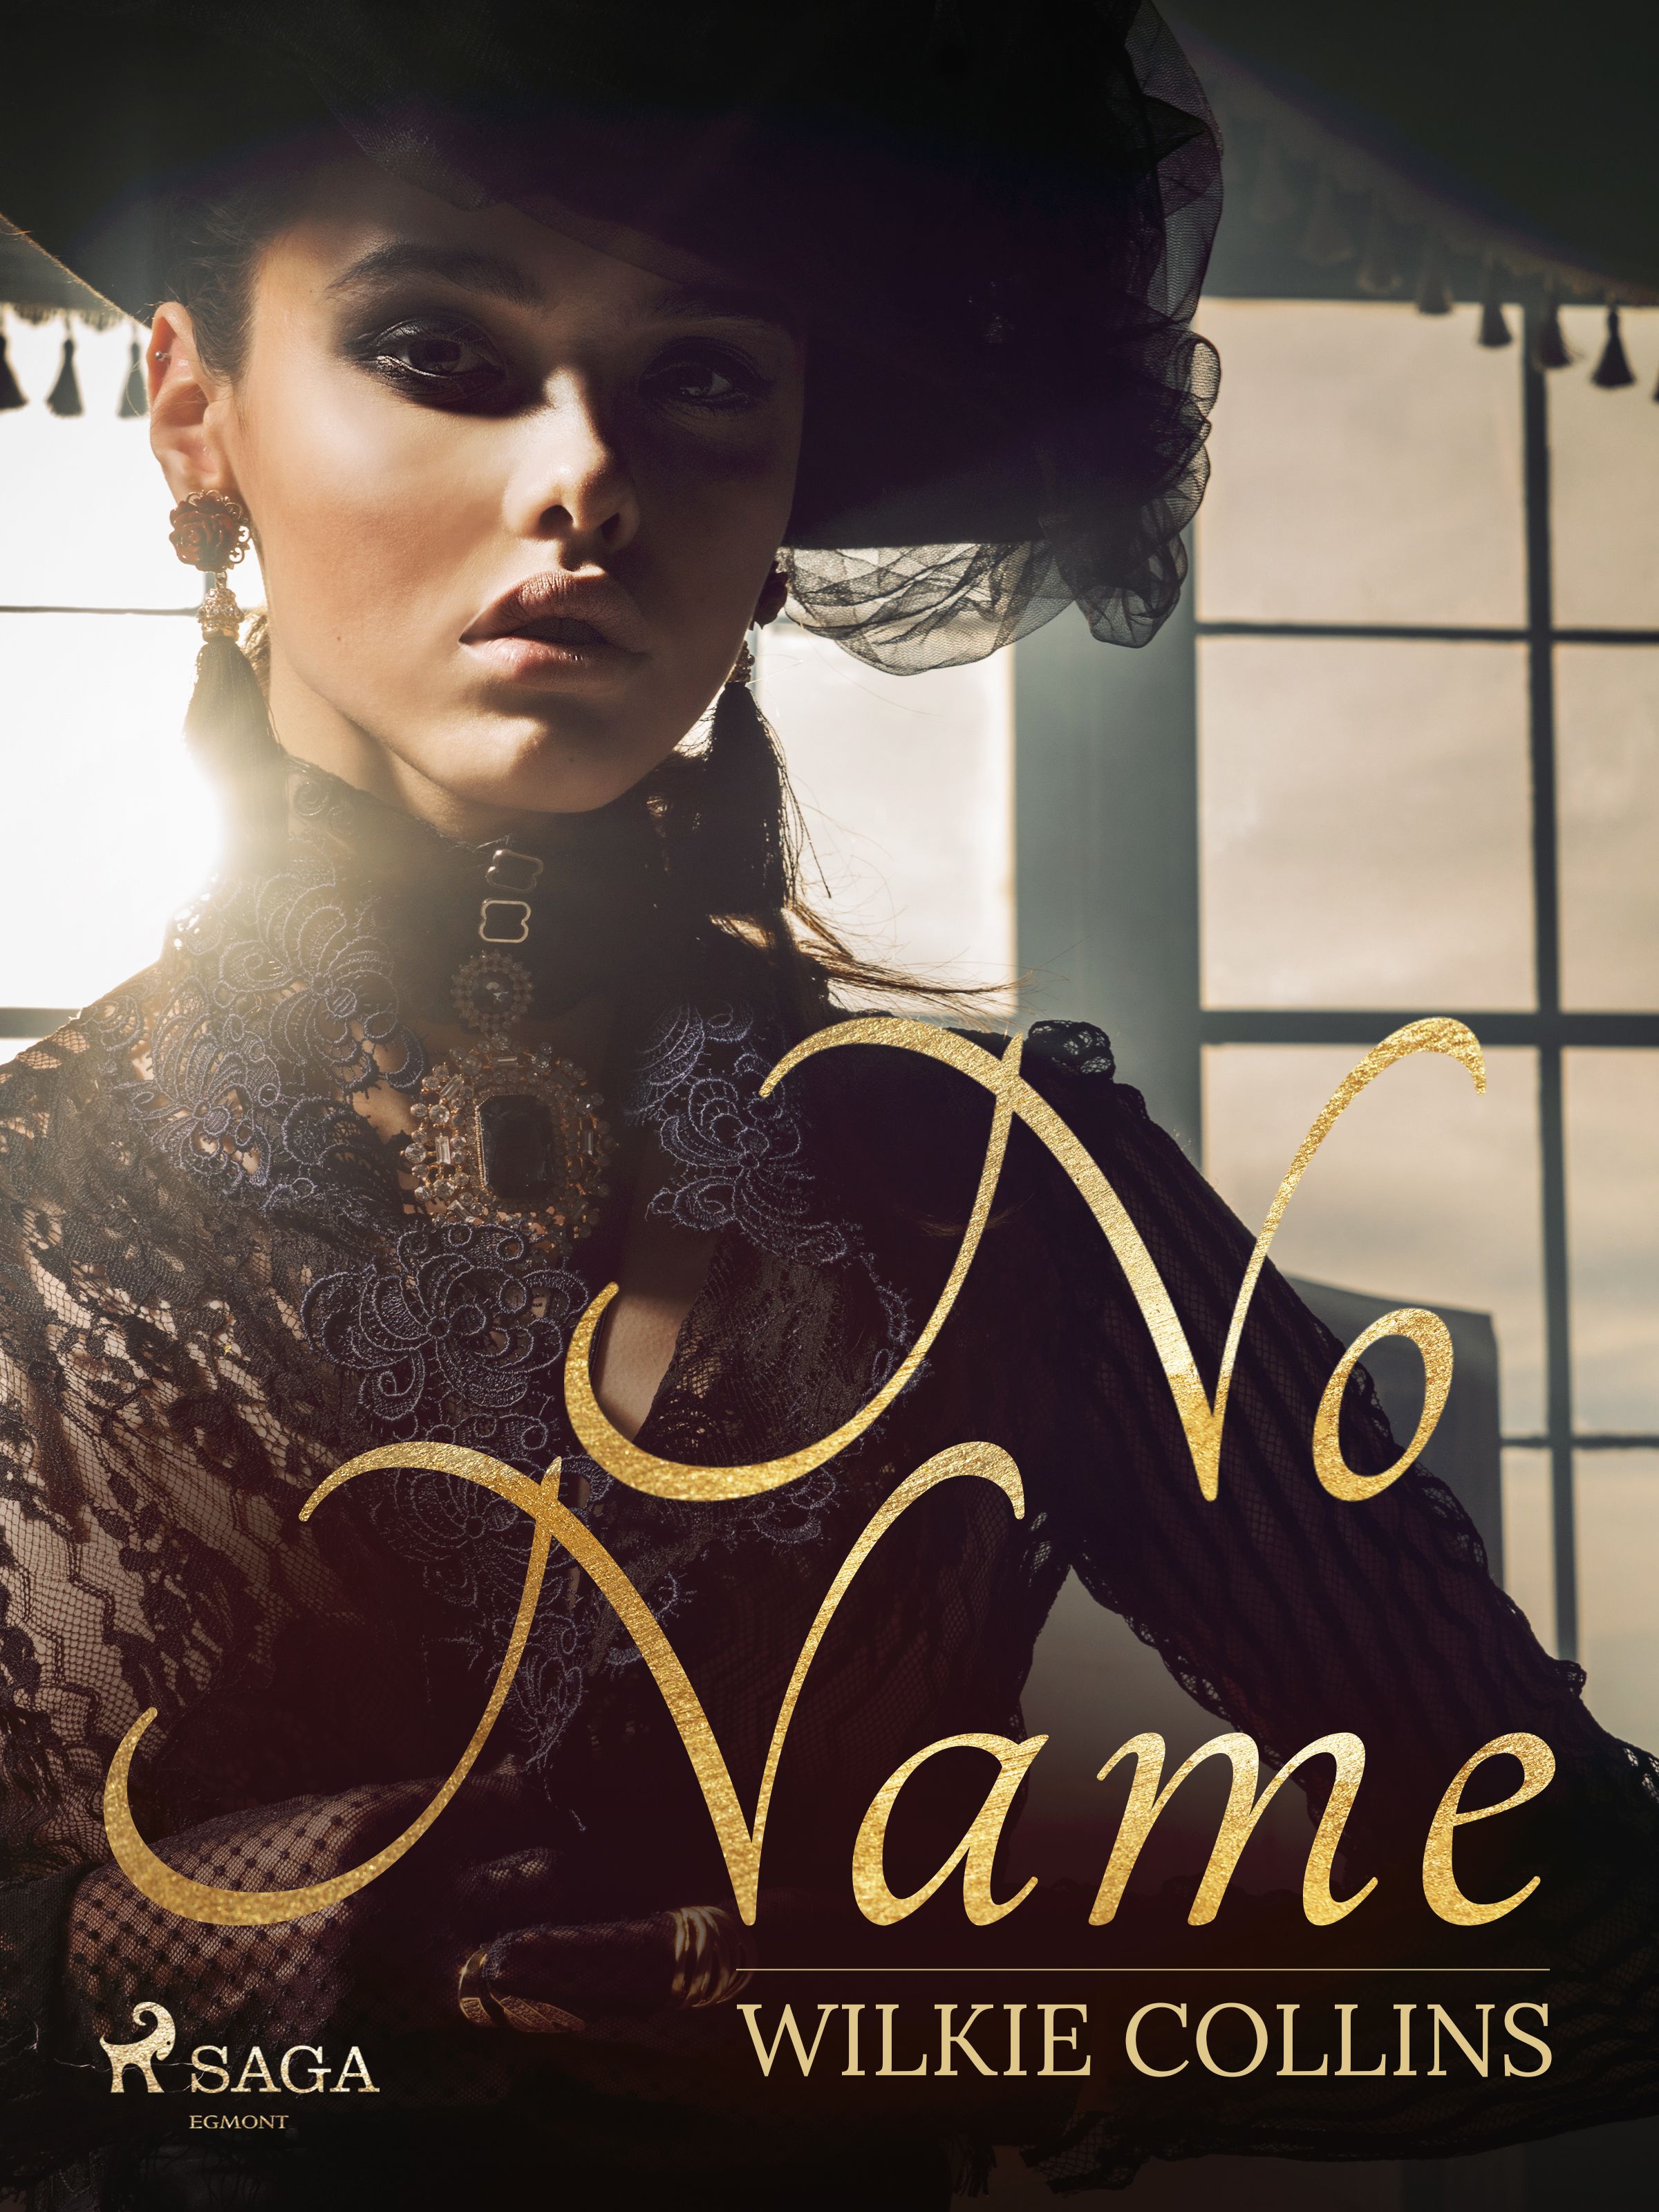 No Name, eBook by Wilkie Collins